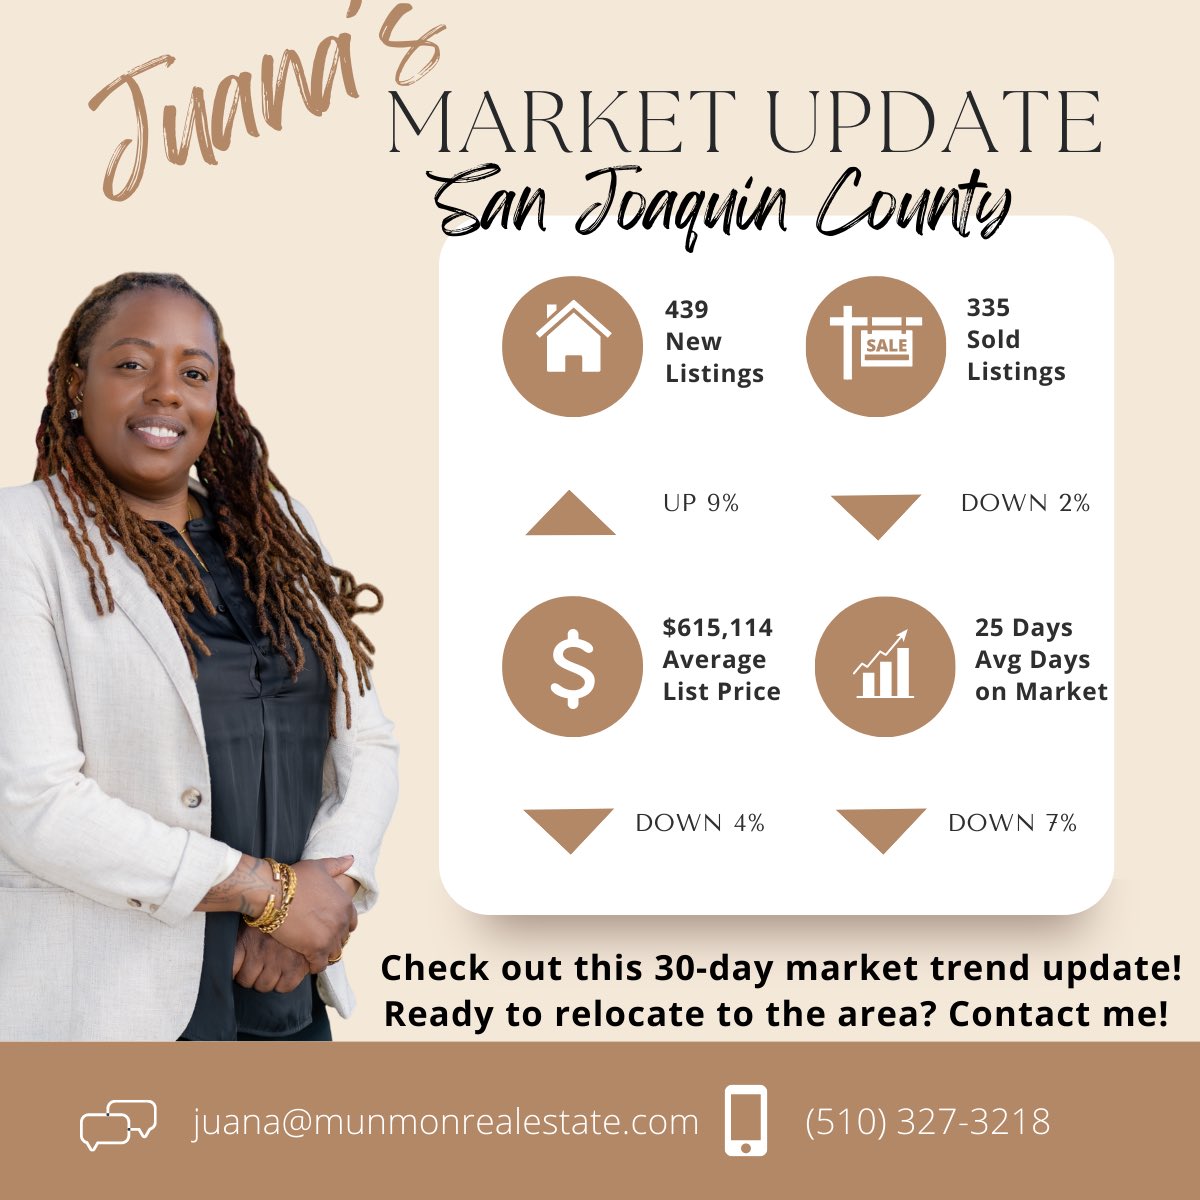 Ready to move to the area? Contact me! 

#marketupdate #realestateexpert #sanjoaquincounty #readytobuyahome #buyersagent #buyersagentlife #realestatewhisperer #sanjoaquinhomes #sanjoaquinvalley #centralvalleyrealestate